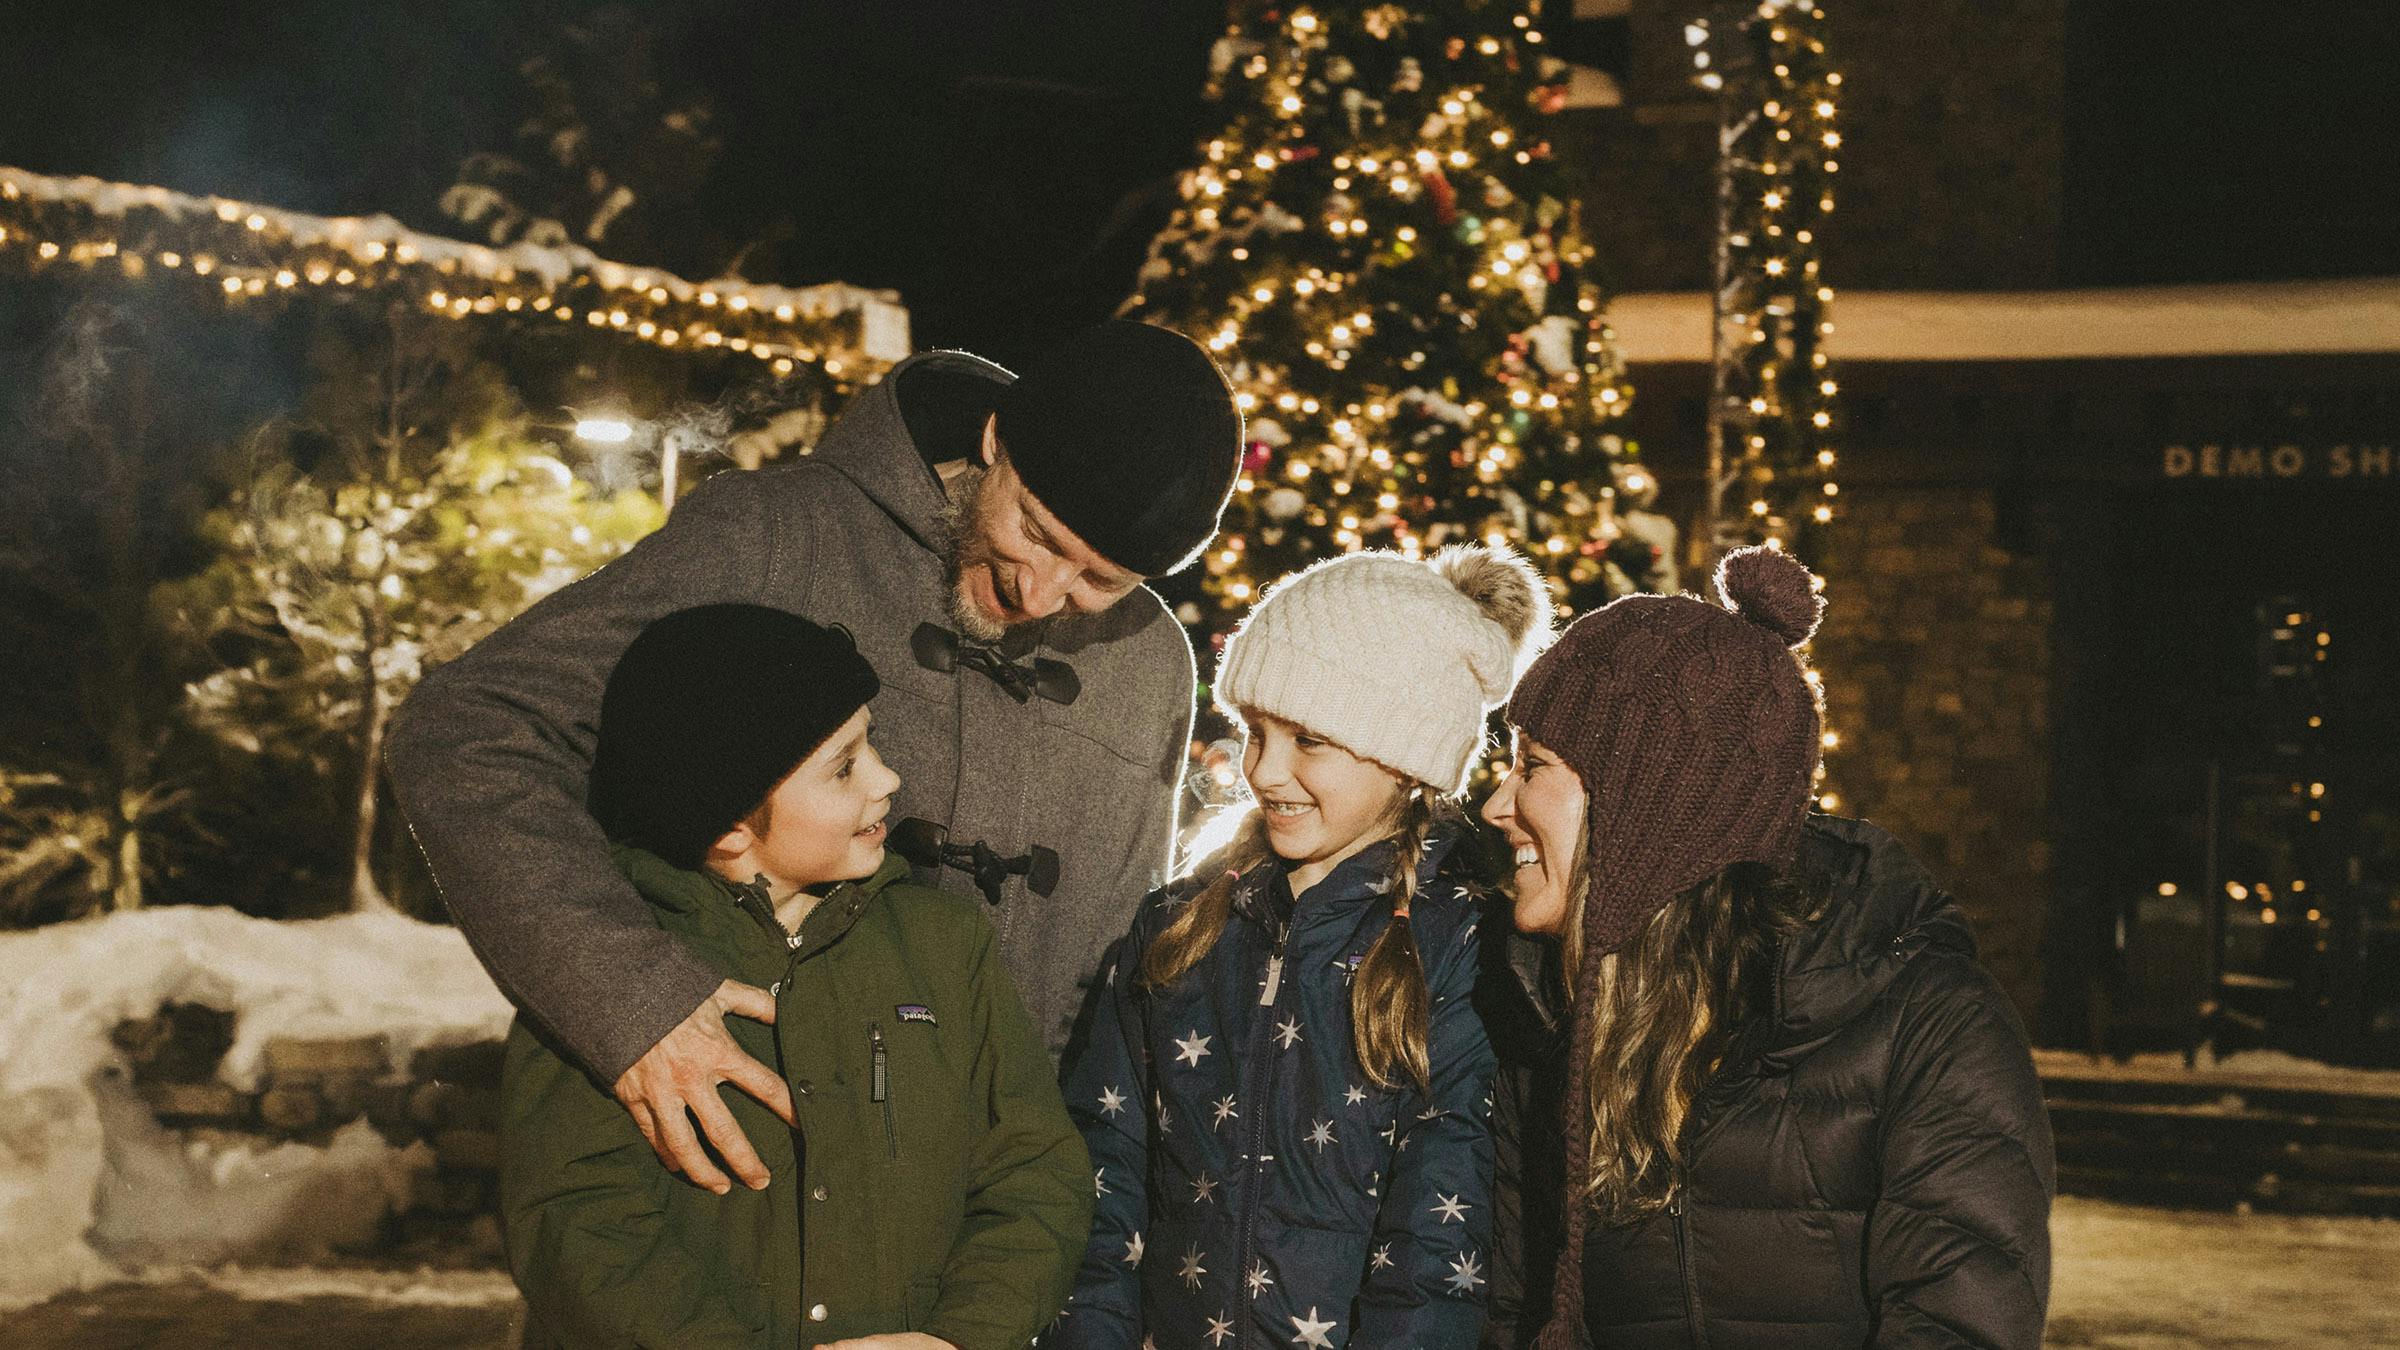 Smiling family in front of holiday tree lights